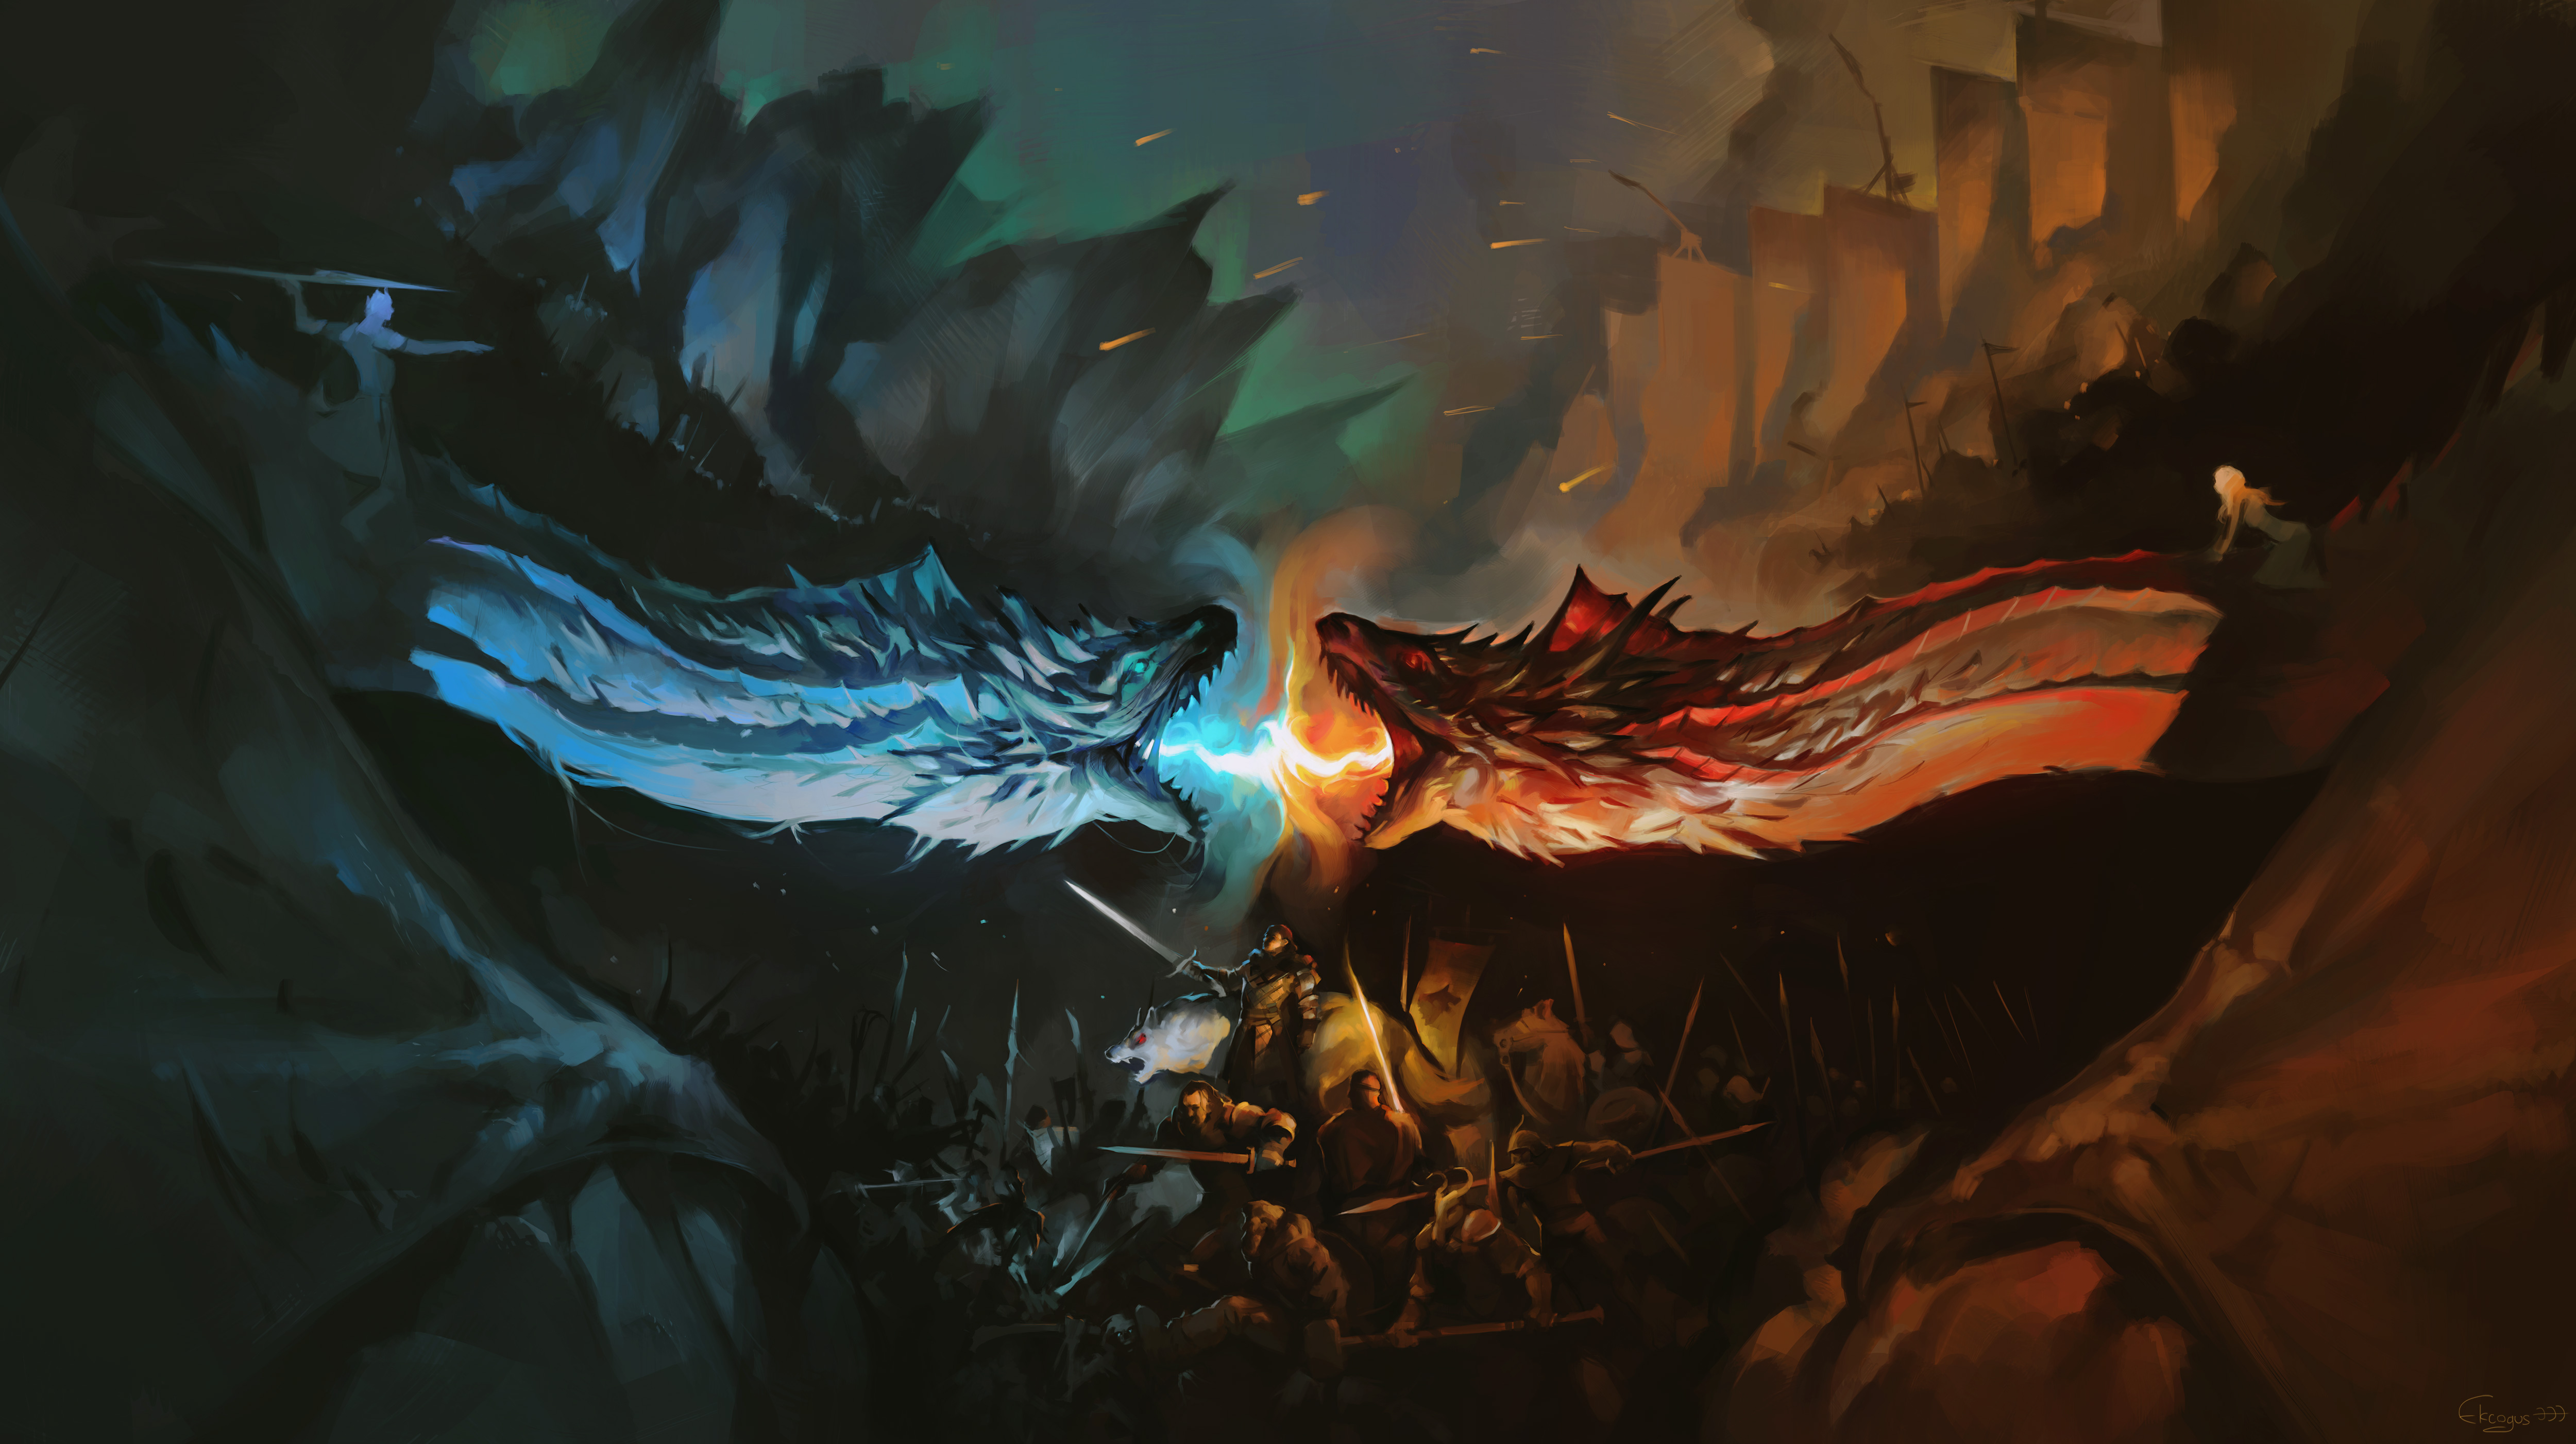 Night King And Khaleesi Fighting With Dragons Artwork, HD Tv Shows, 4k  Wallpapers, Images, Backgrounds, Photos and Pictures